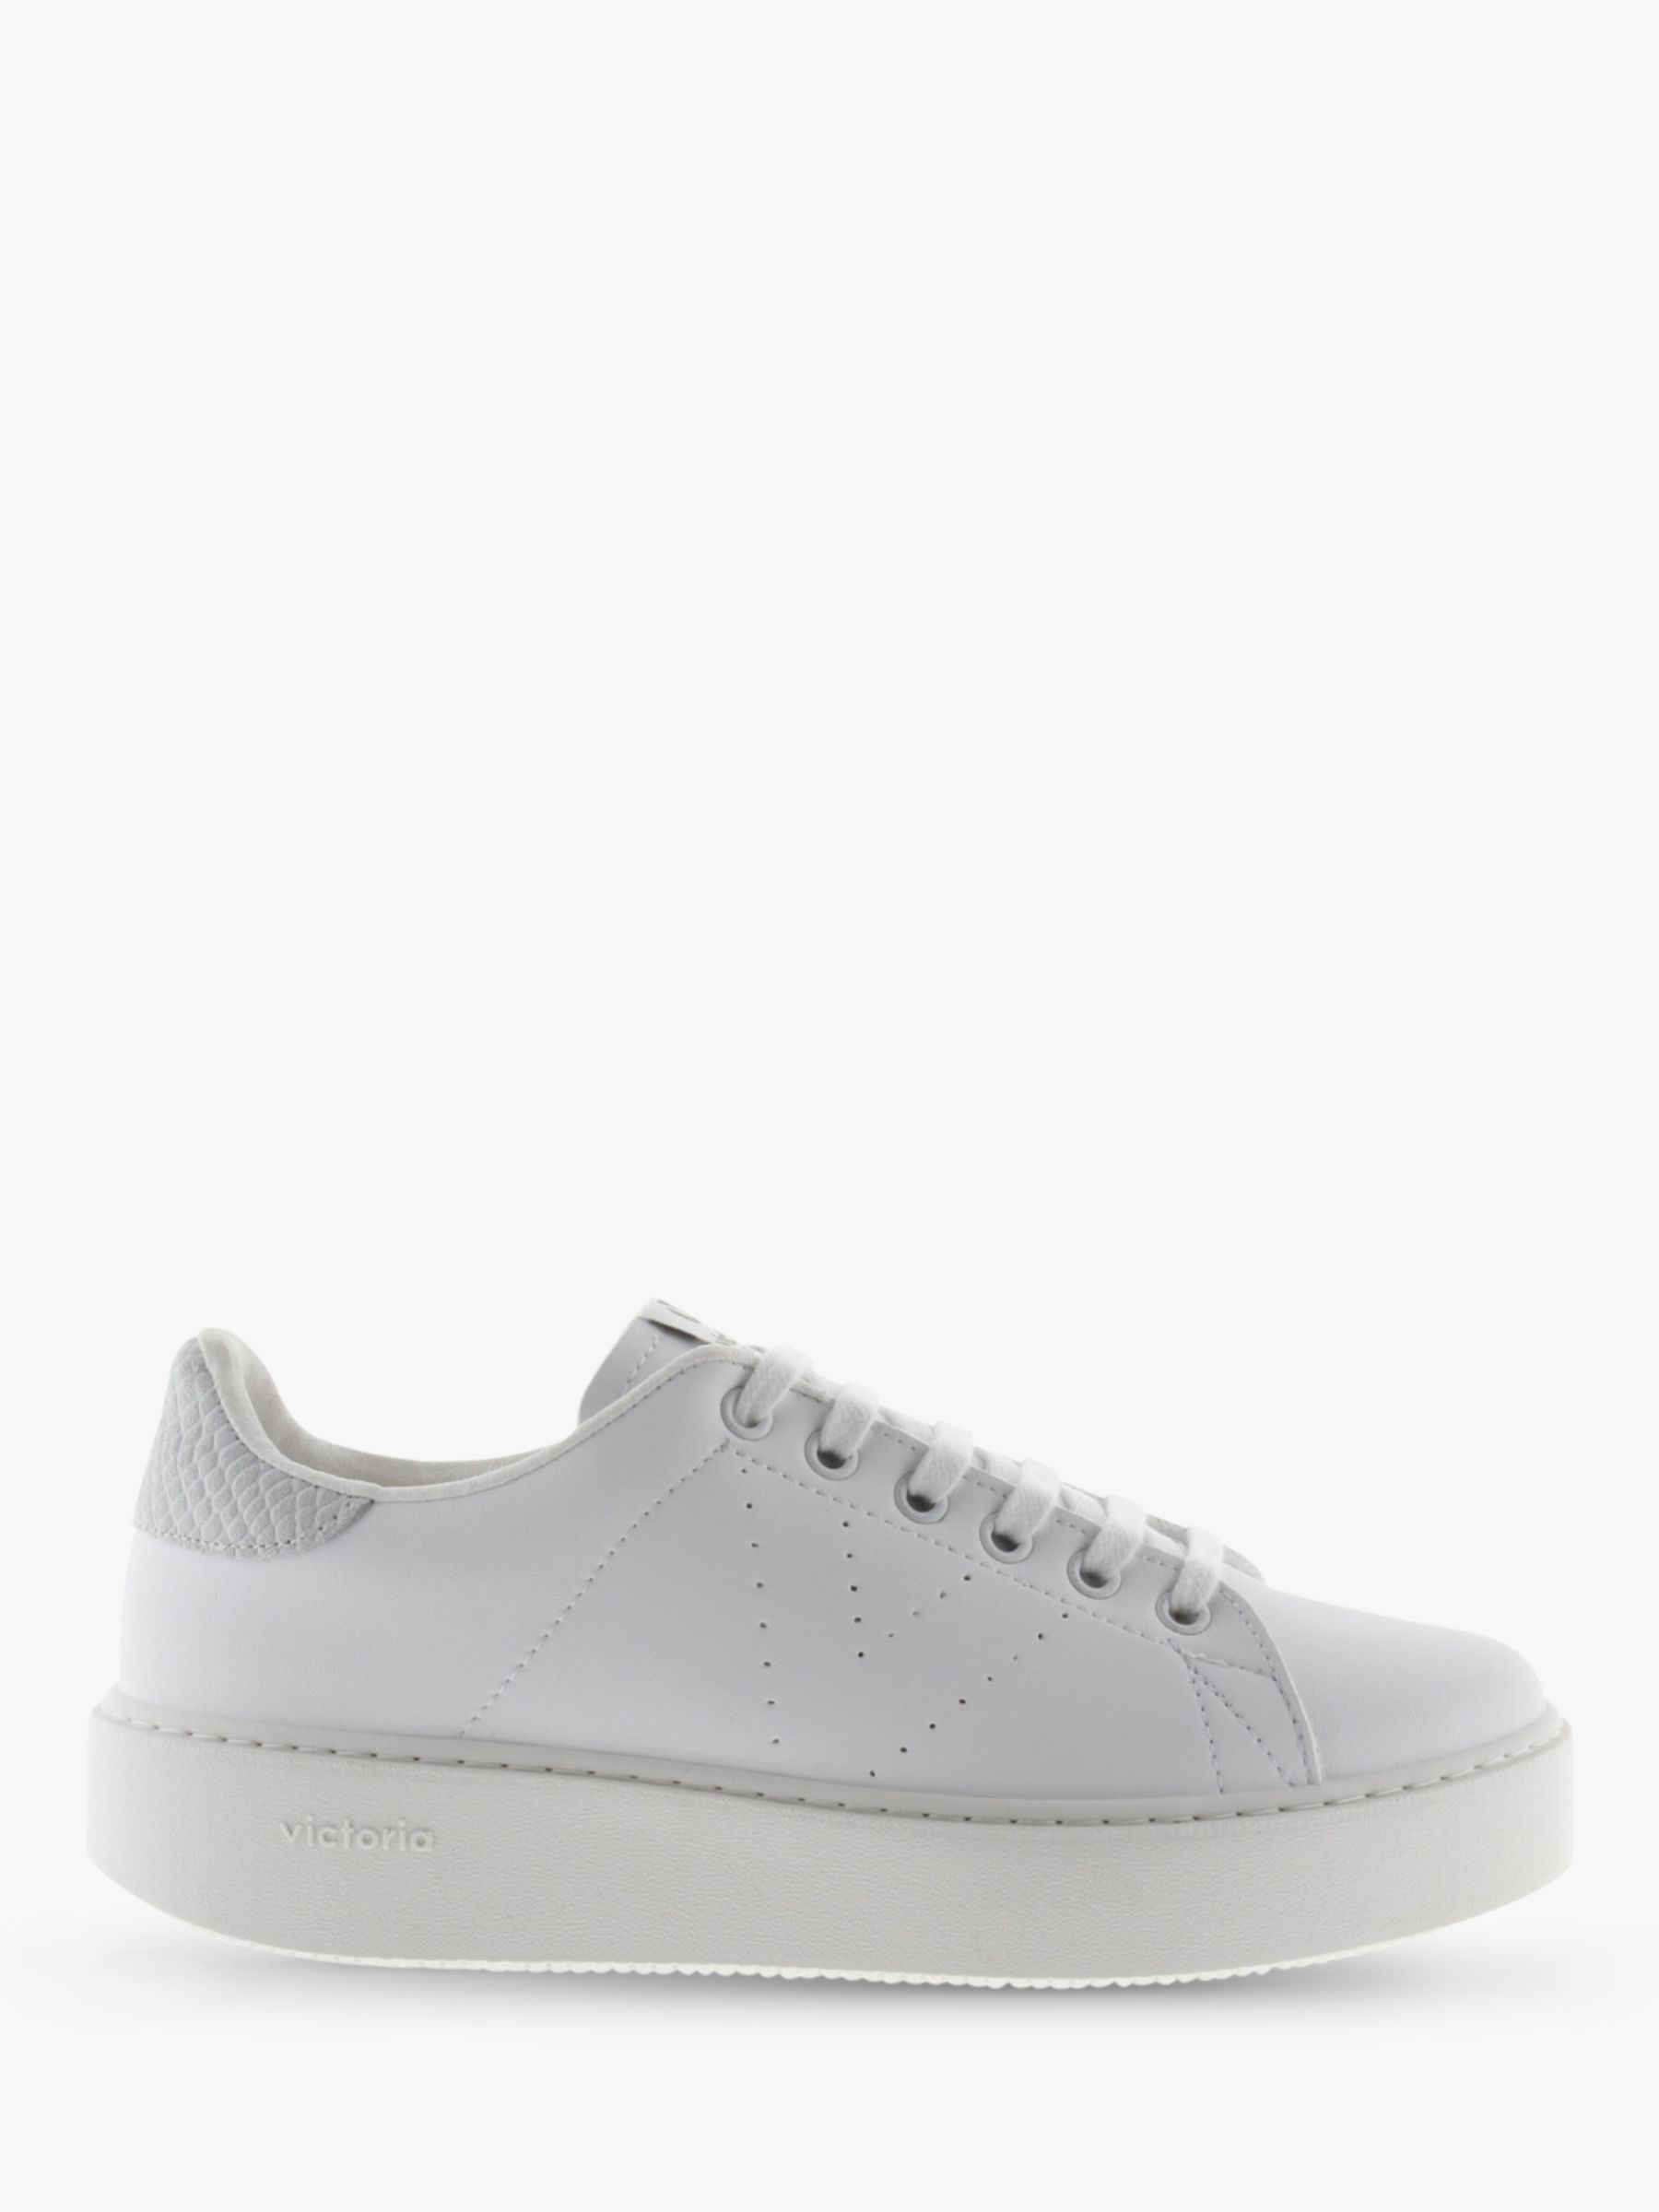 Victoria Shoes Utopia Flatform Lace Up Trainers, White